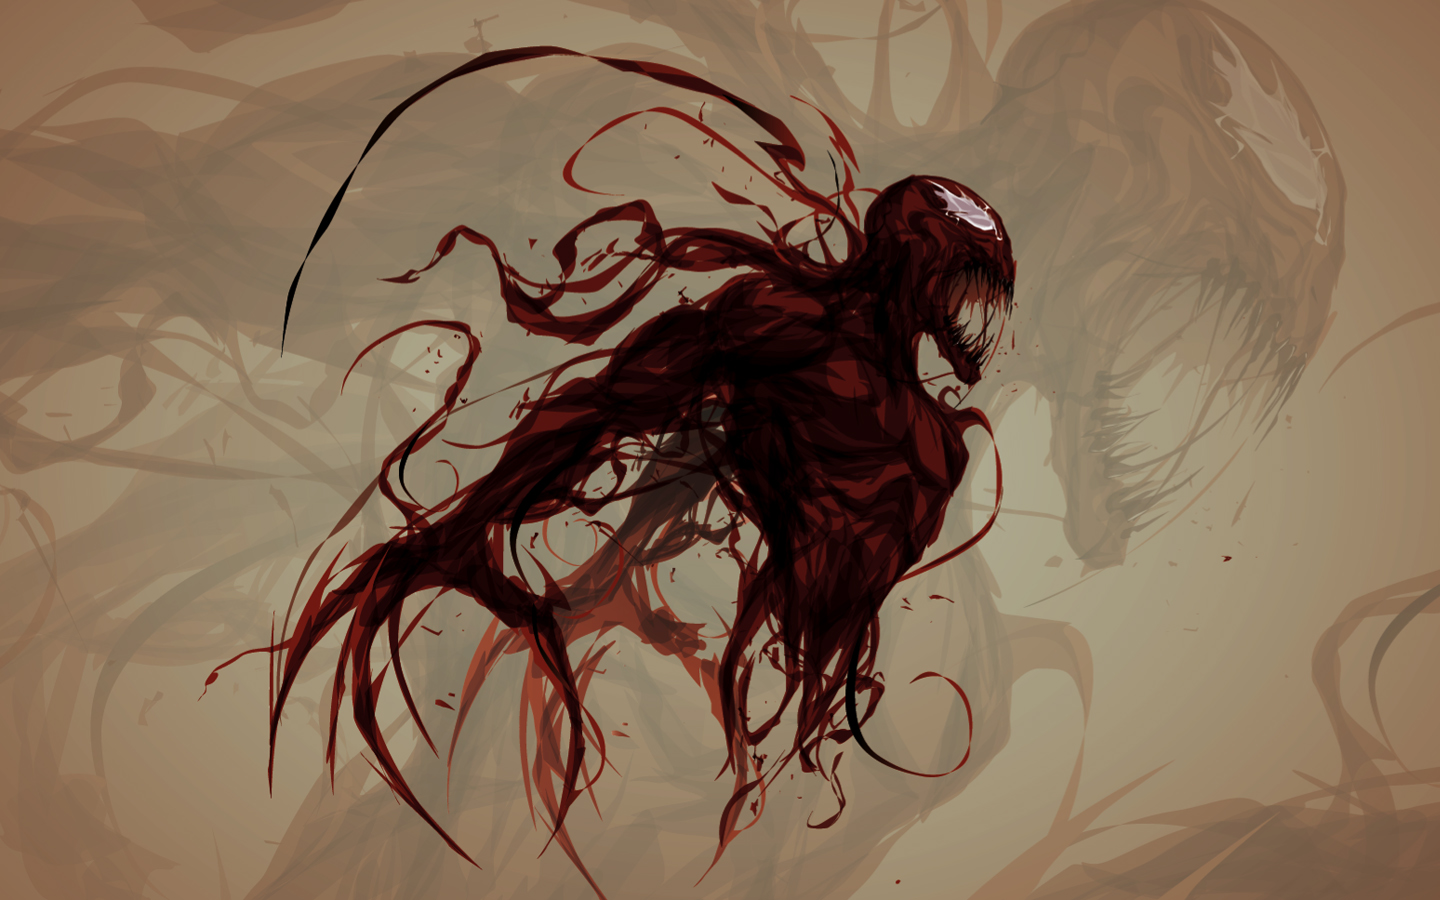 Spiderman Carnage Wallpaper Images amp Pictures   Becuo